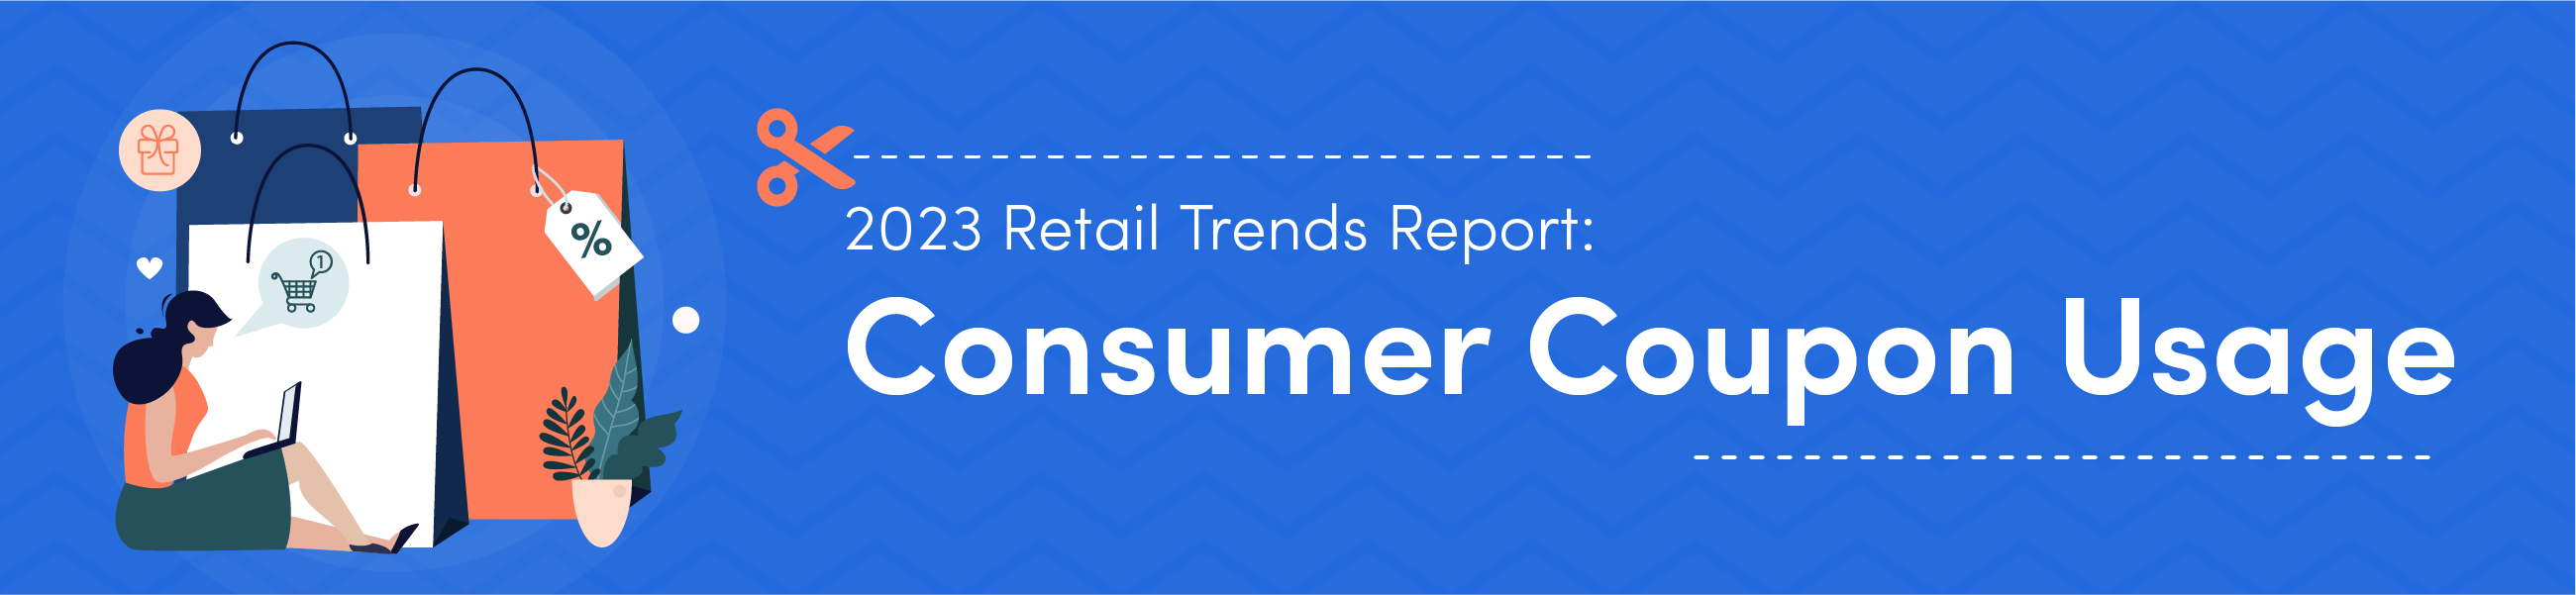 2023 Retail Trends Report: Consumer Coupon Usage